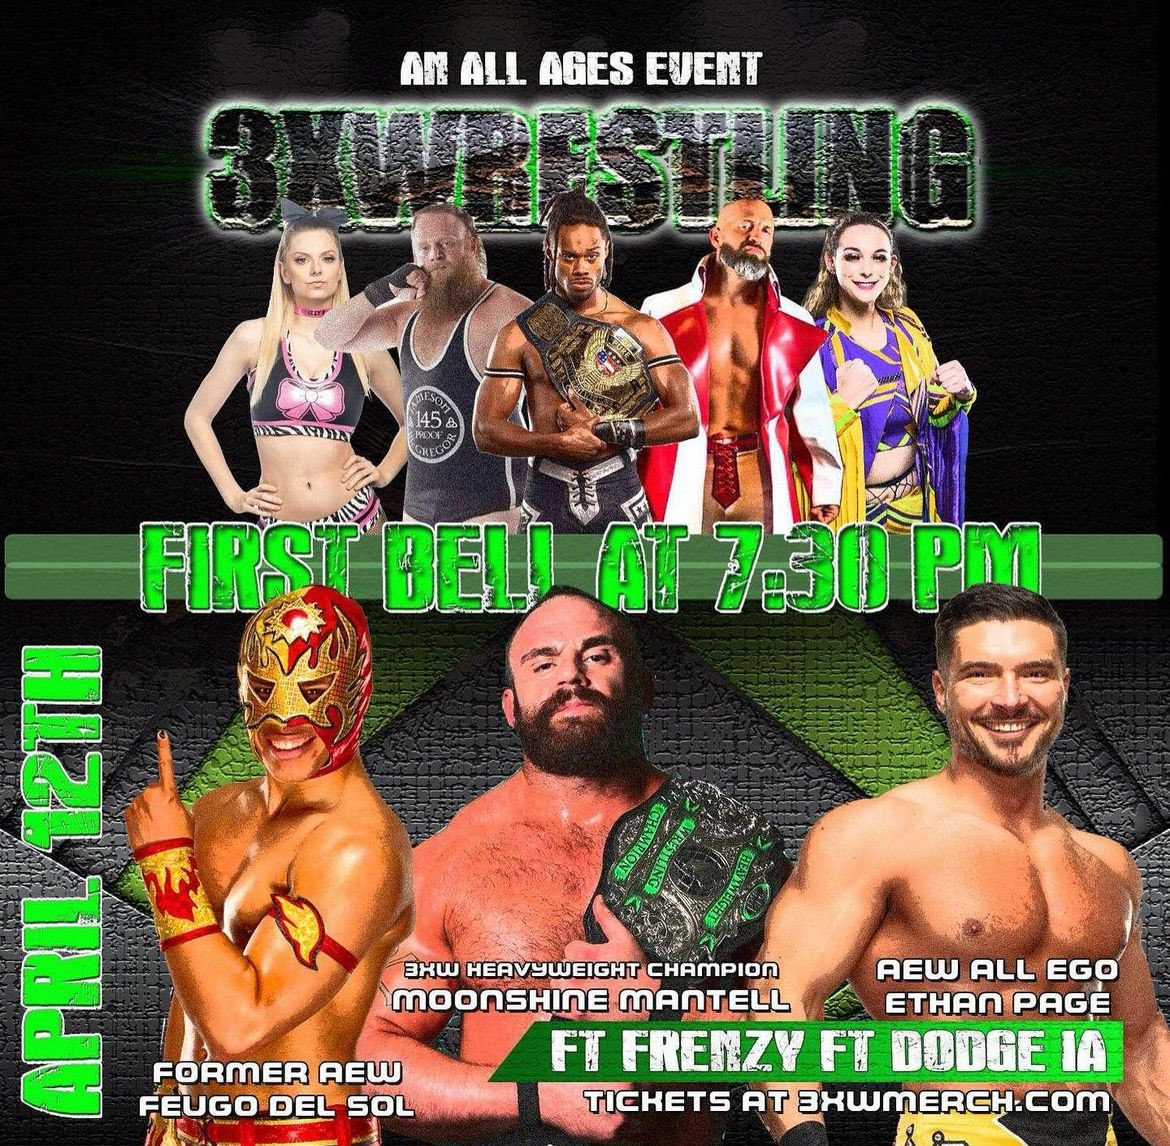 FORT DODGE PEEPS This Friday 4/12 in Fort Dodge, IA at Cardiff Event Center/Fort Frenzy! Doors: 7pm Bell 7:30 🎟️ at 3xwmerch.com GA Tickets $15 Advance ($20 day of) Front Row $25 (7 left) VIP (special Section) $45 (4 Left) Early entry for VIP & Front Row at 6:30